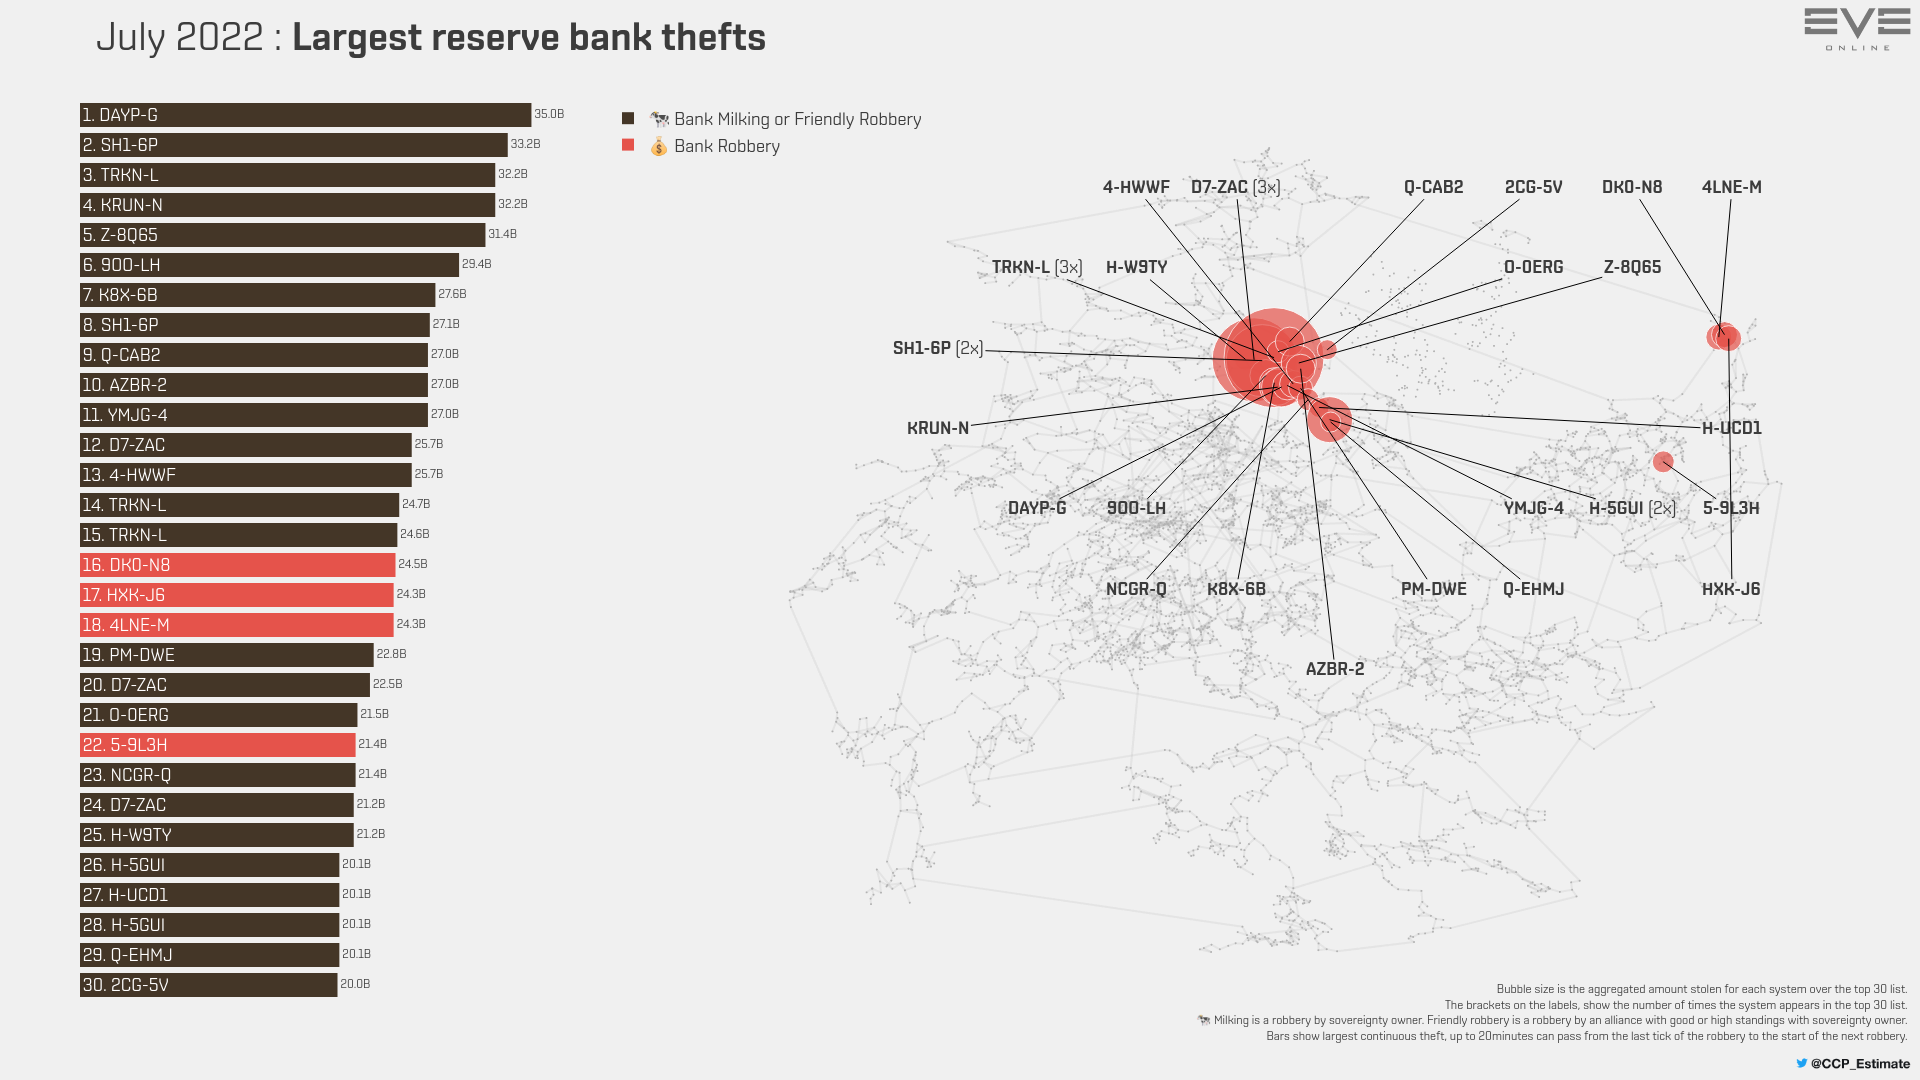 10c_ess_reservebank_thefts.png